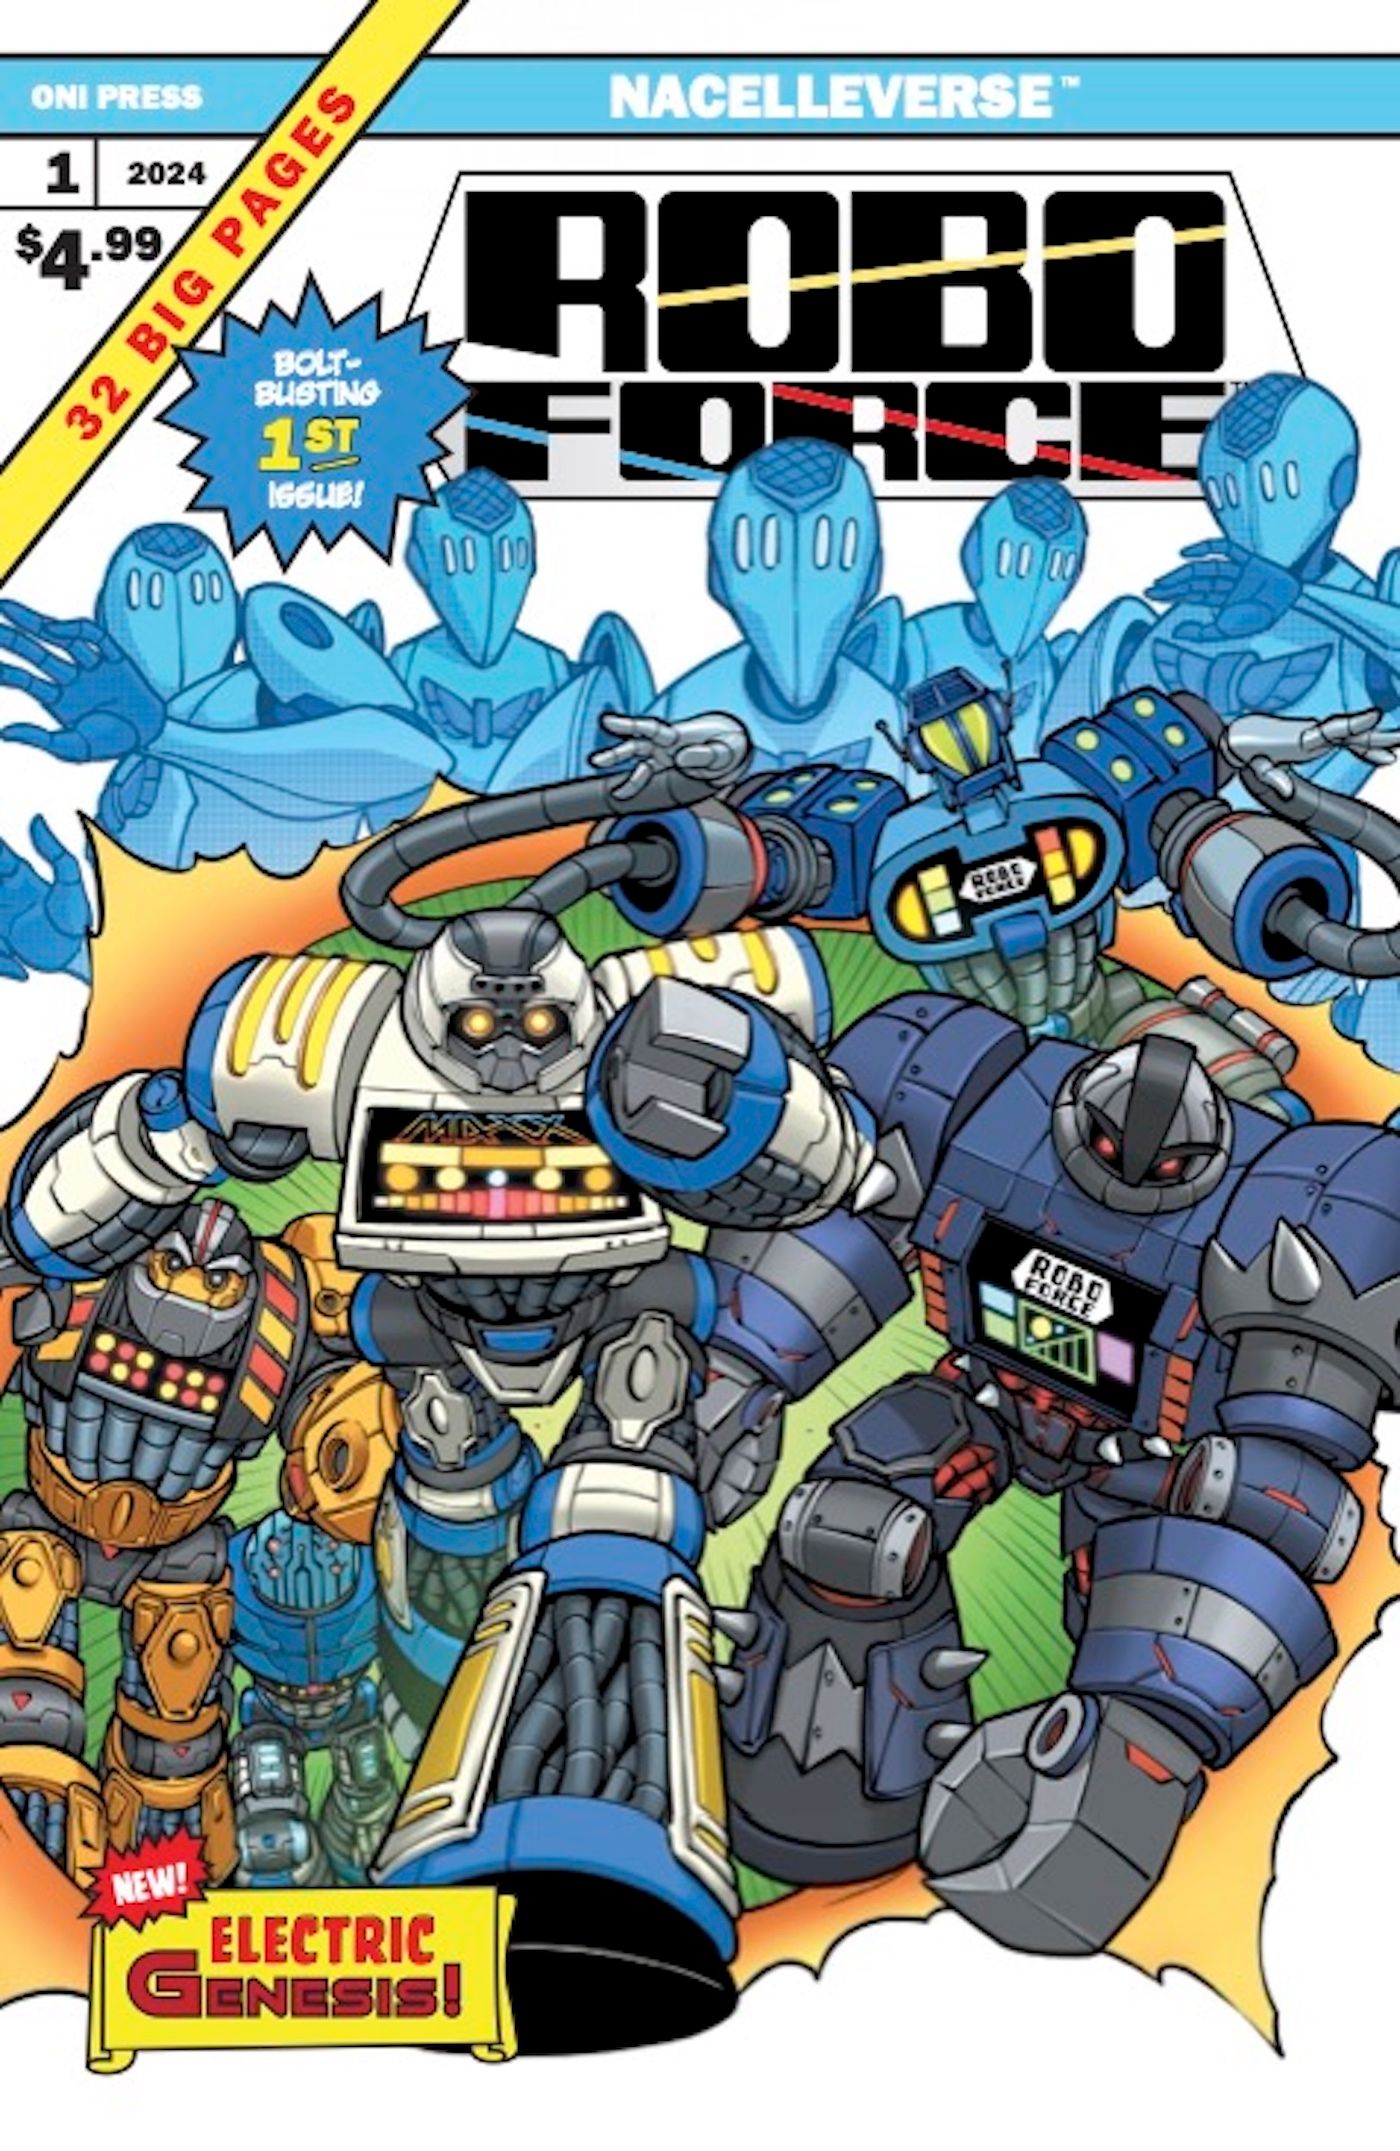 RoboForce #1 cover by Rhoald Marcellius